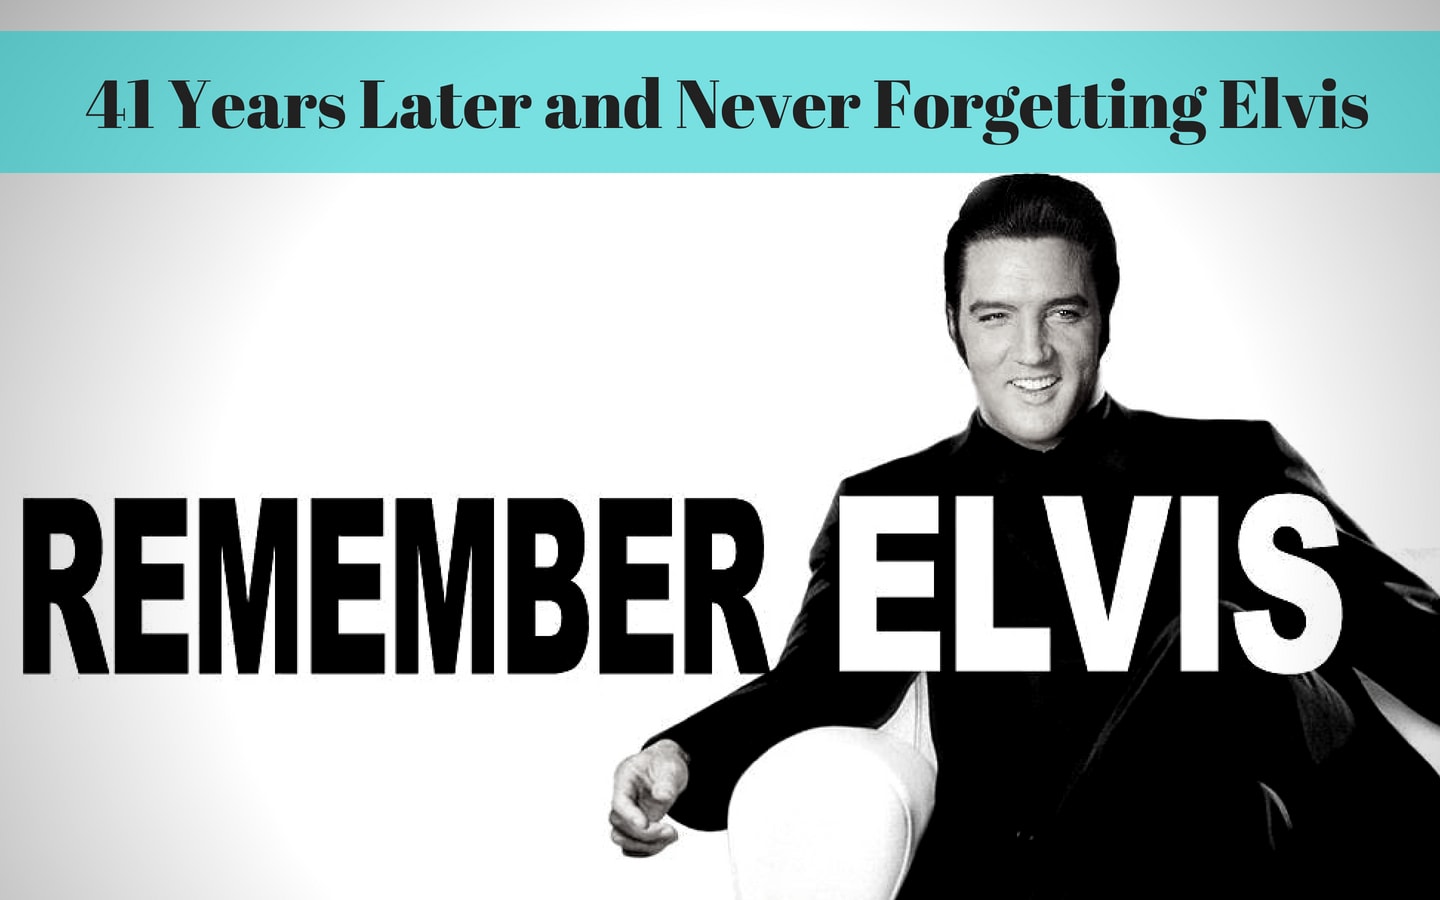 41 Years Later and Never Forgetting Elvis